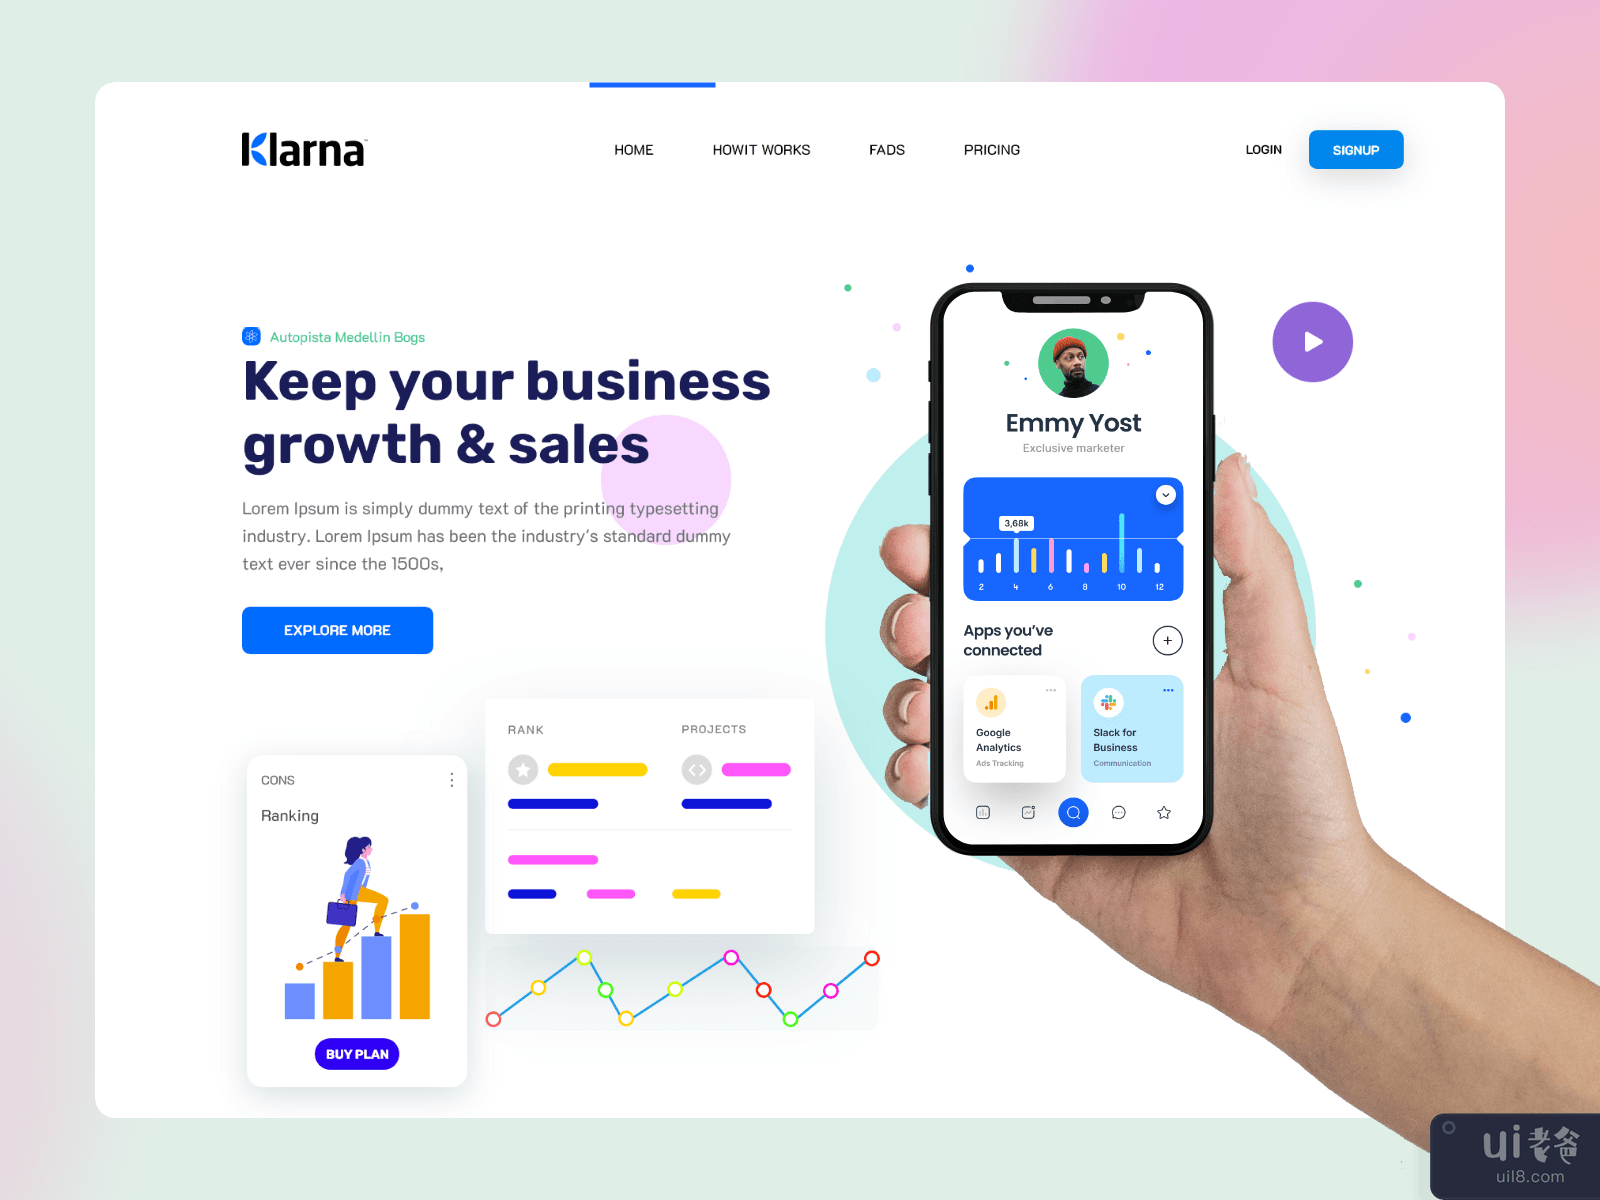 Business growth landing page